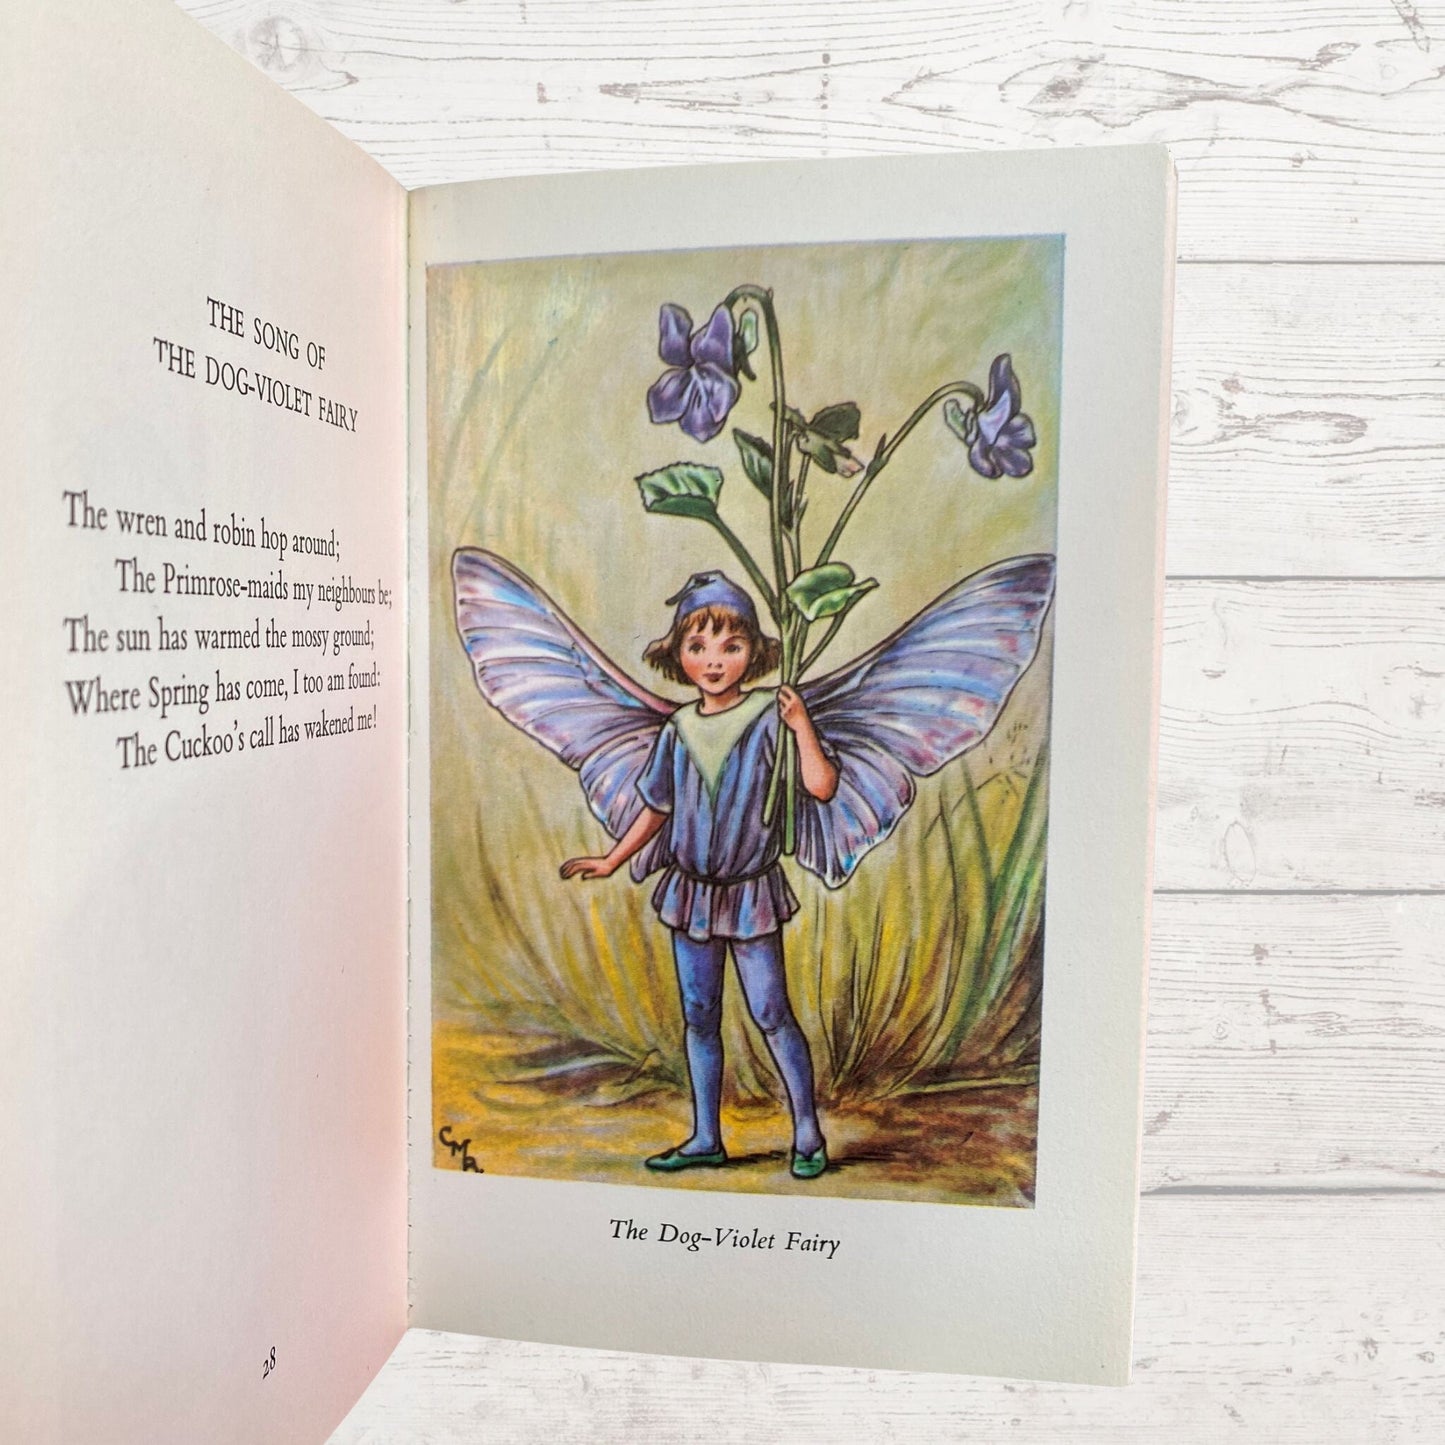 Flower Fairies of the Spring, 1970s edition by Cicely M Barker. Great gift idea